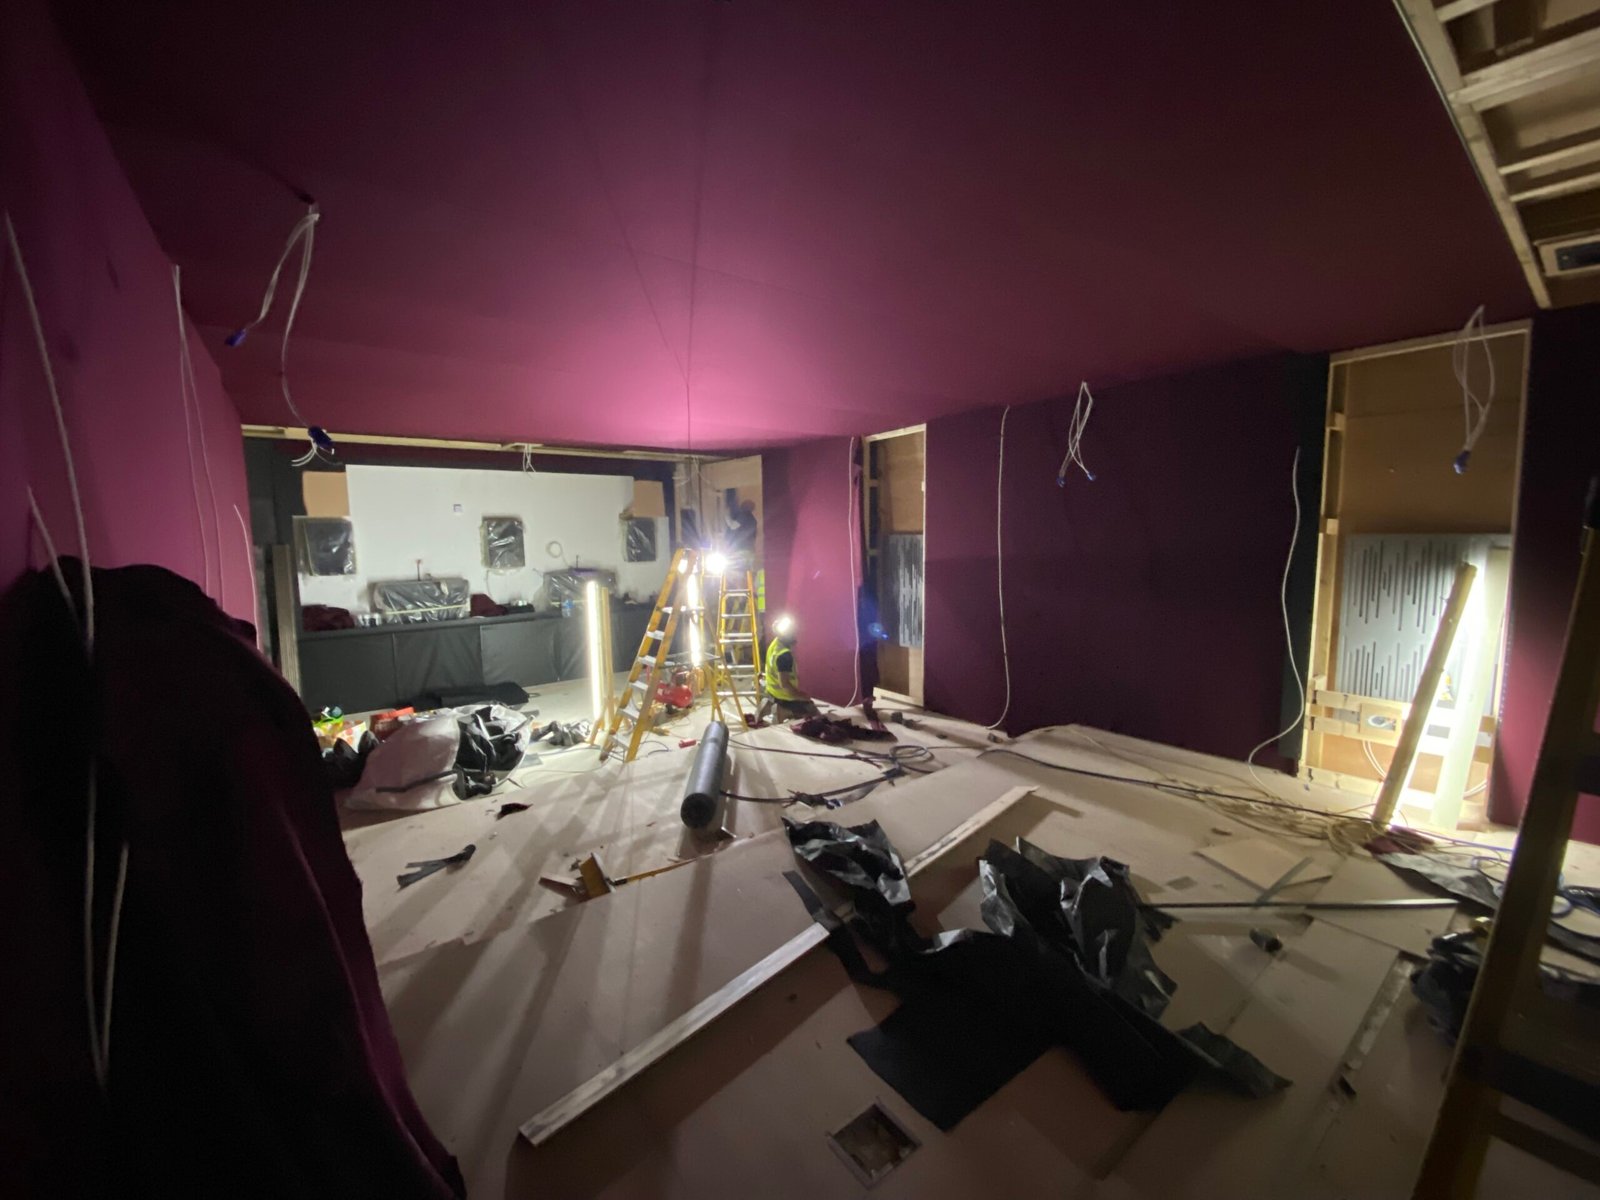 Building a dedicated cinema. Starting to install the fabric walls. Hiding the speakers out of sight.